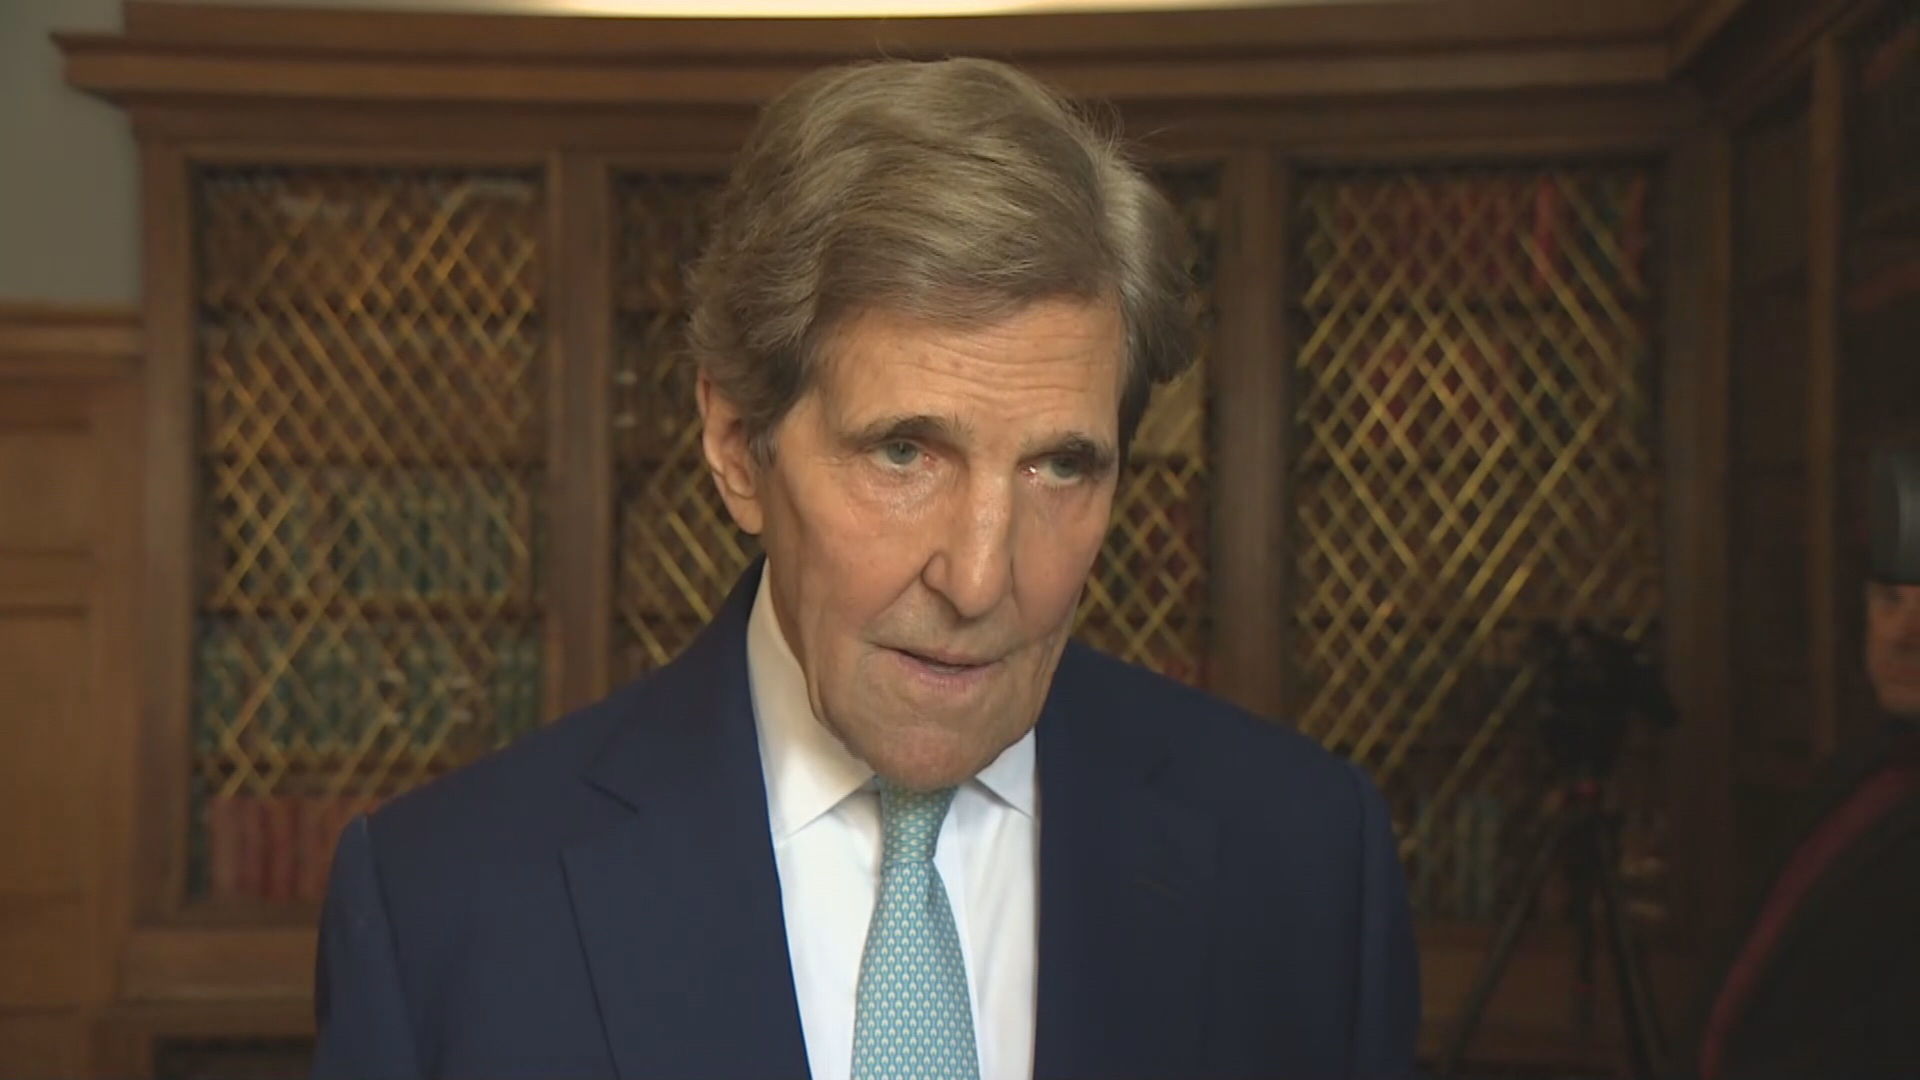 Kerry said fossil fuel use was 'unabated'.